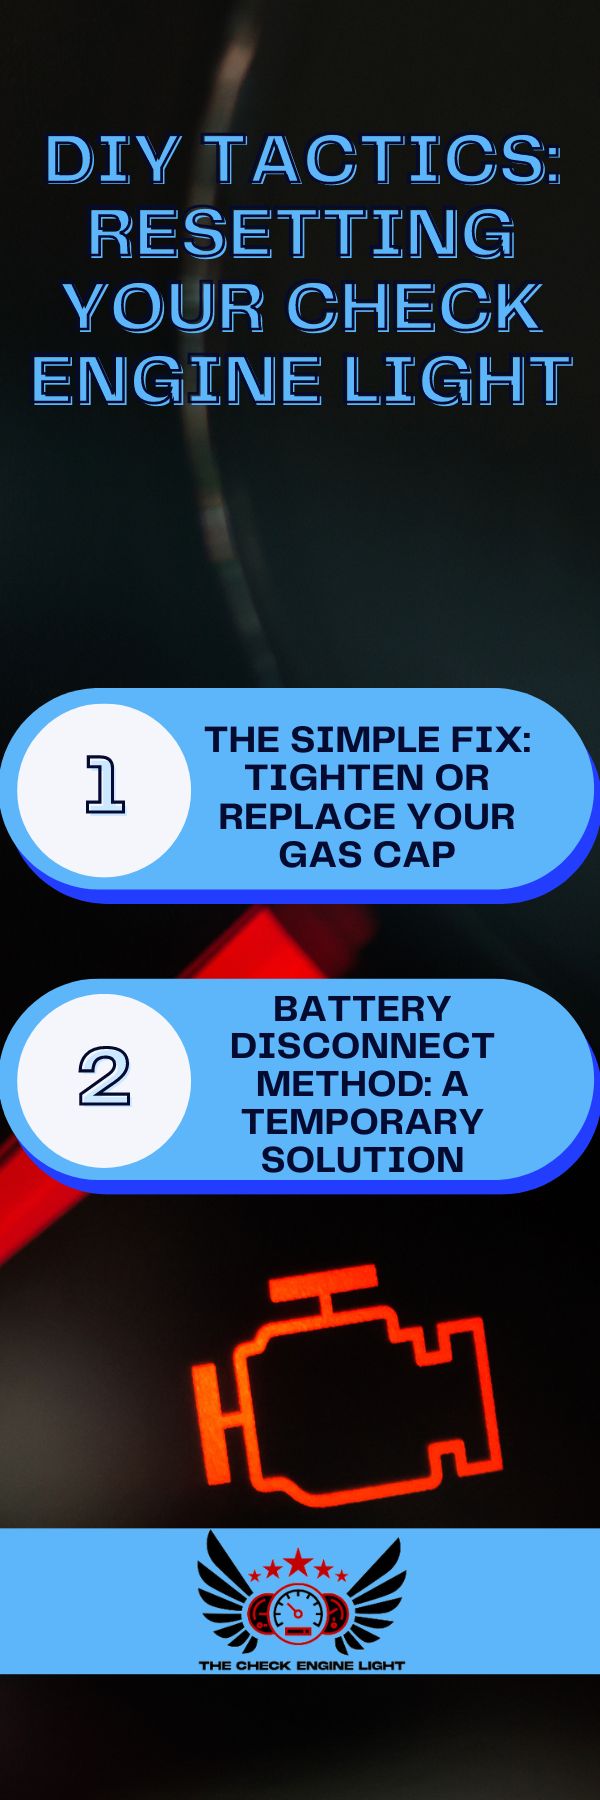 an infographic about DIY Tactics: Resetting Your Check Engine Light